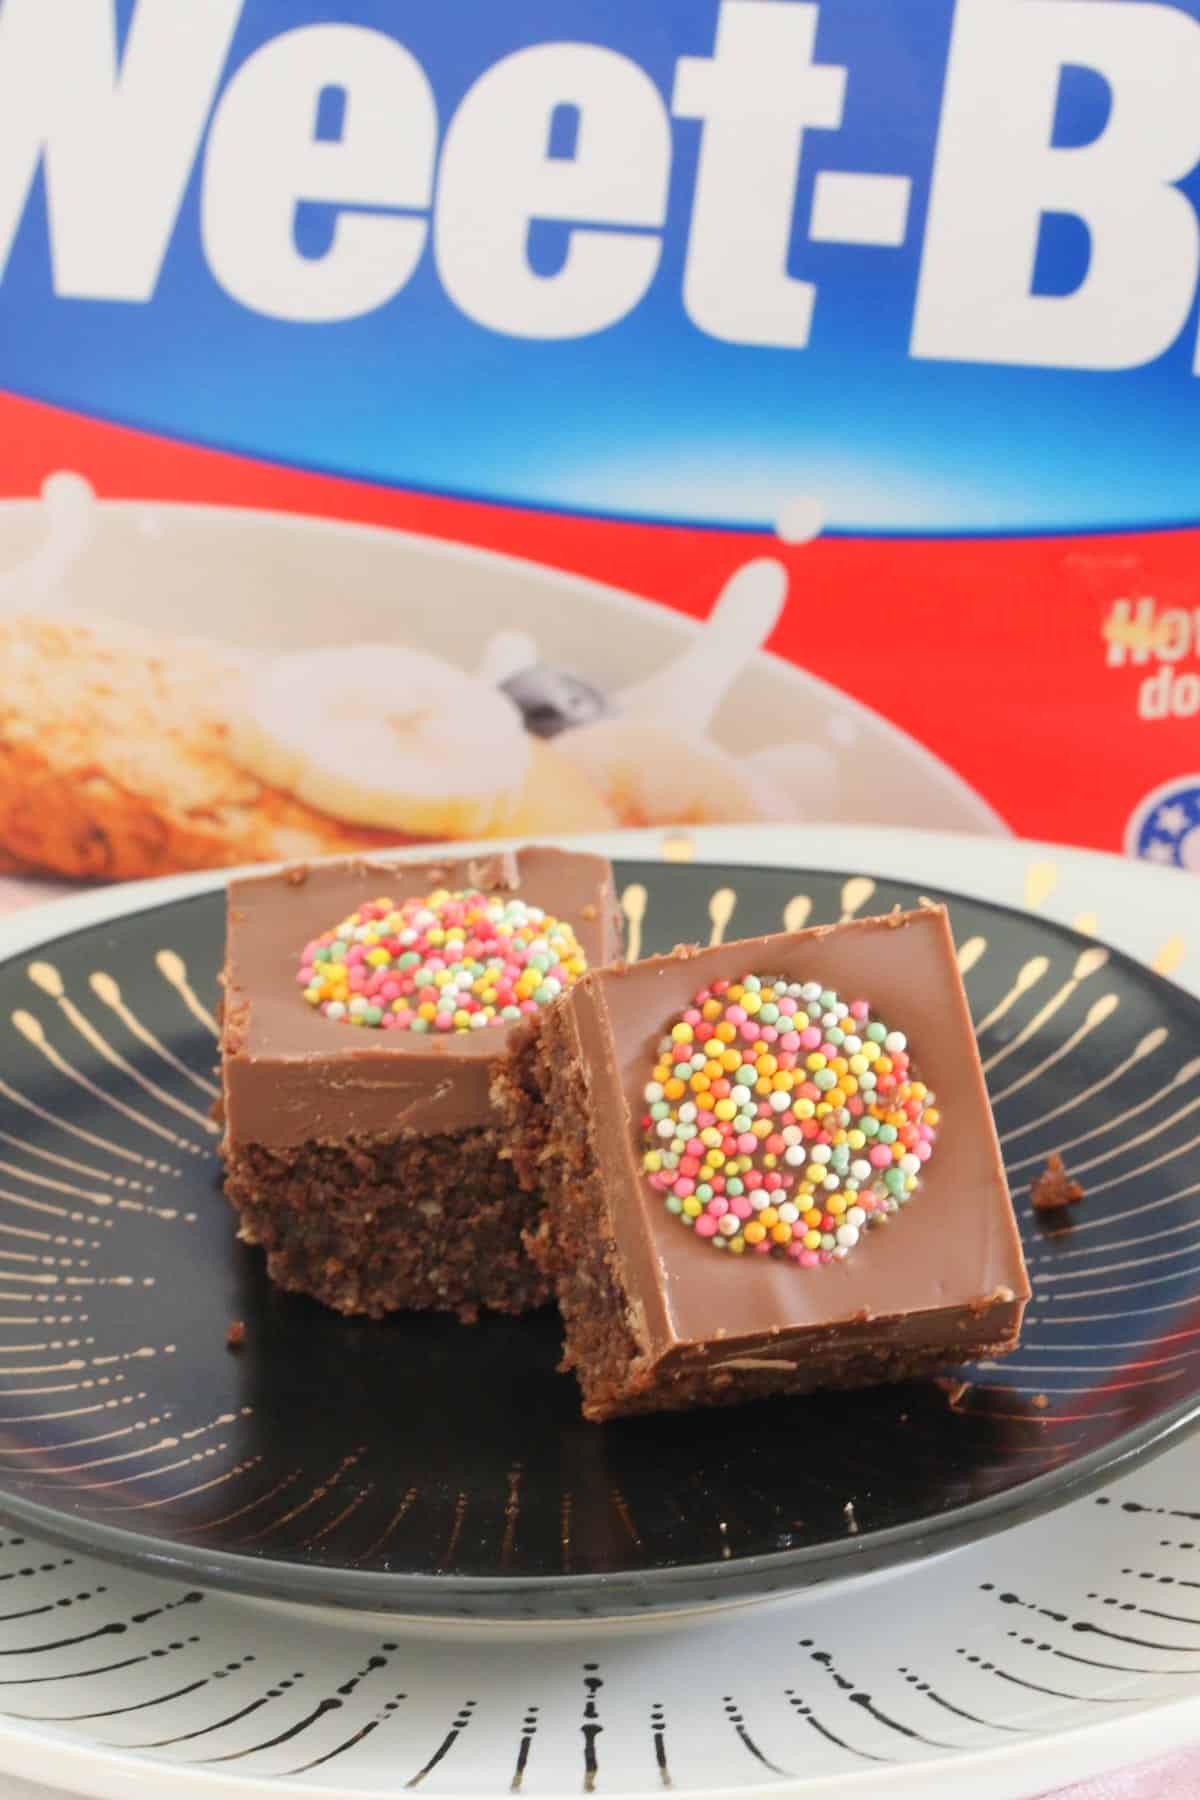 Two pieces of chocolate slice in front of a box of Weet-Bix.